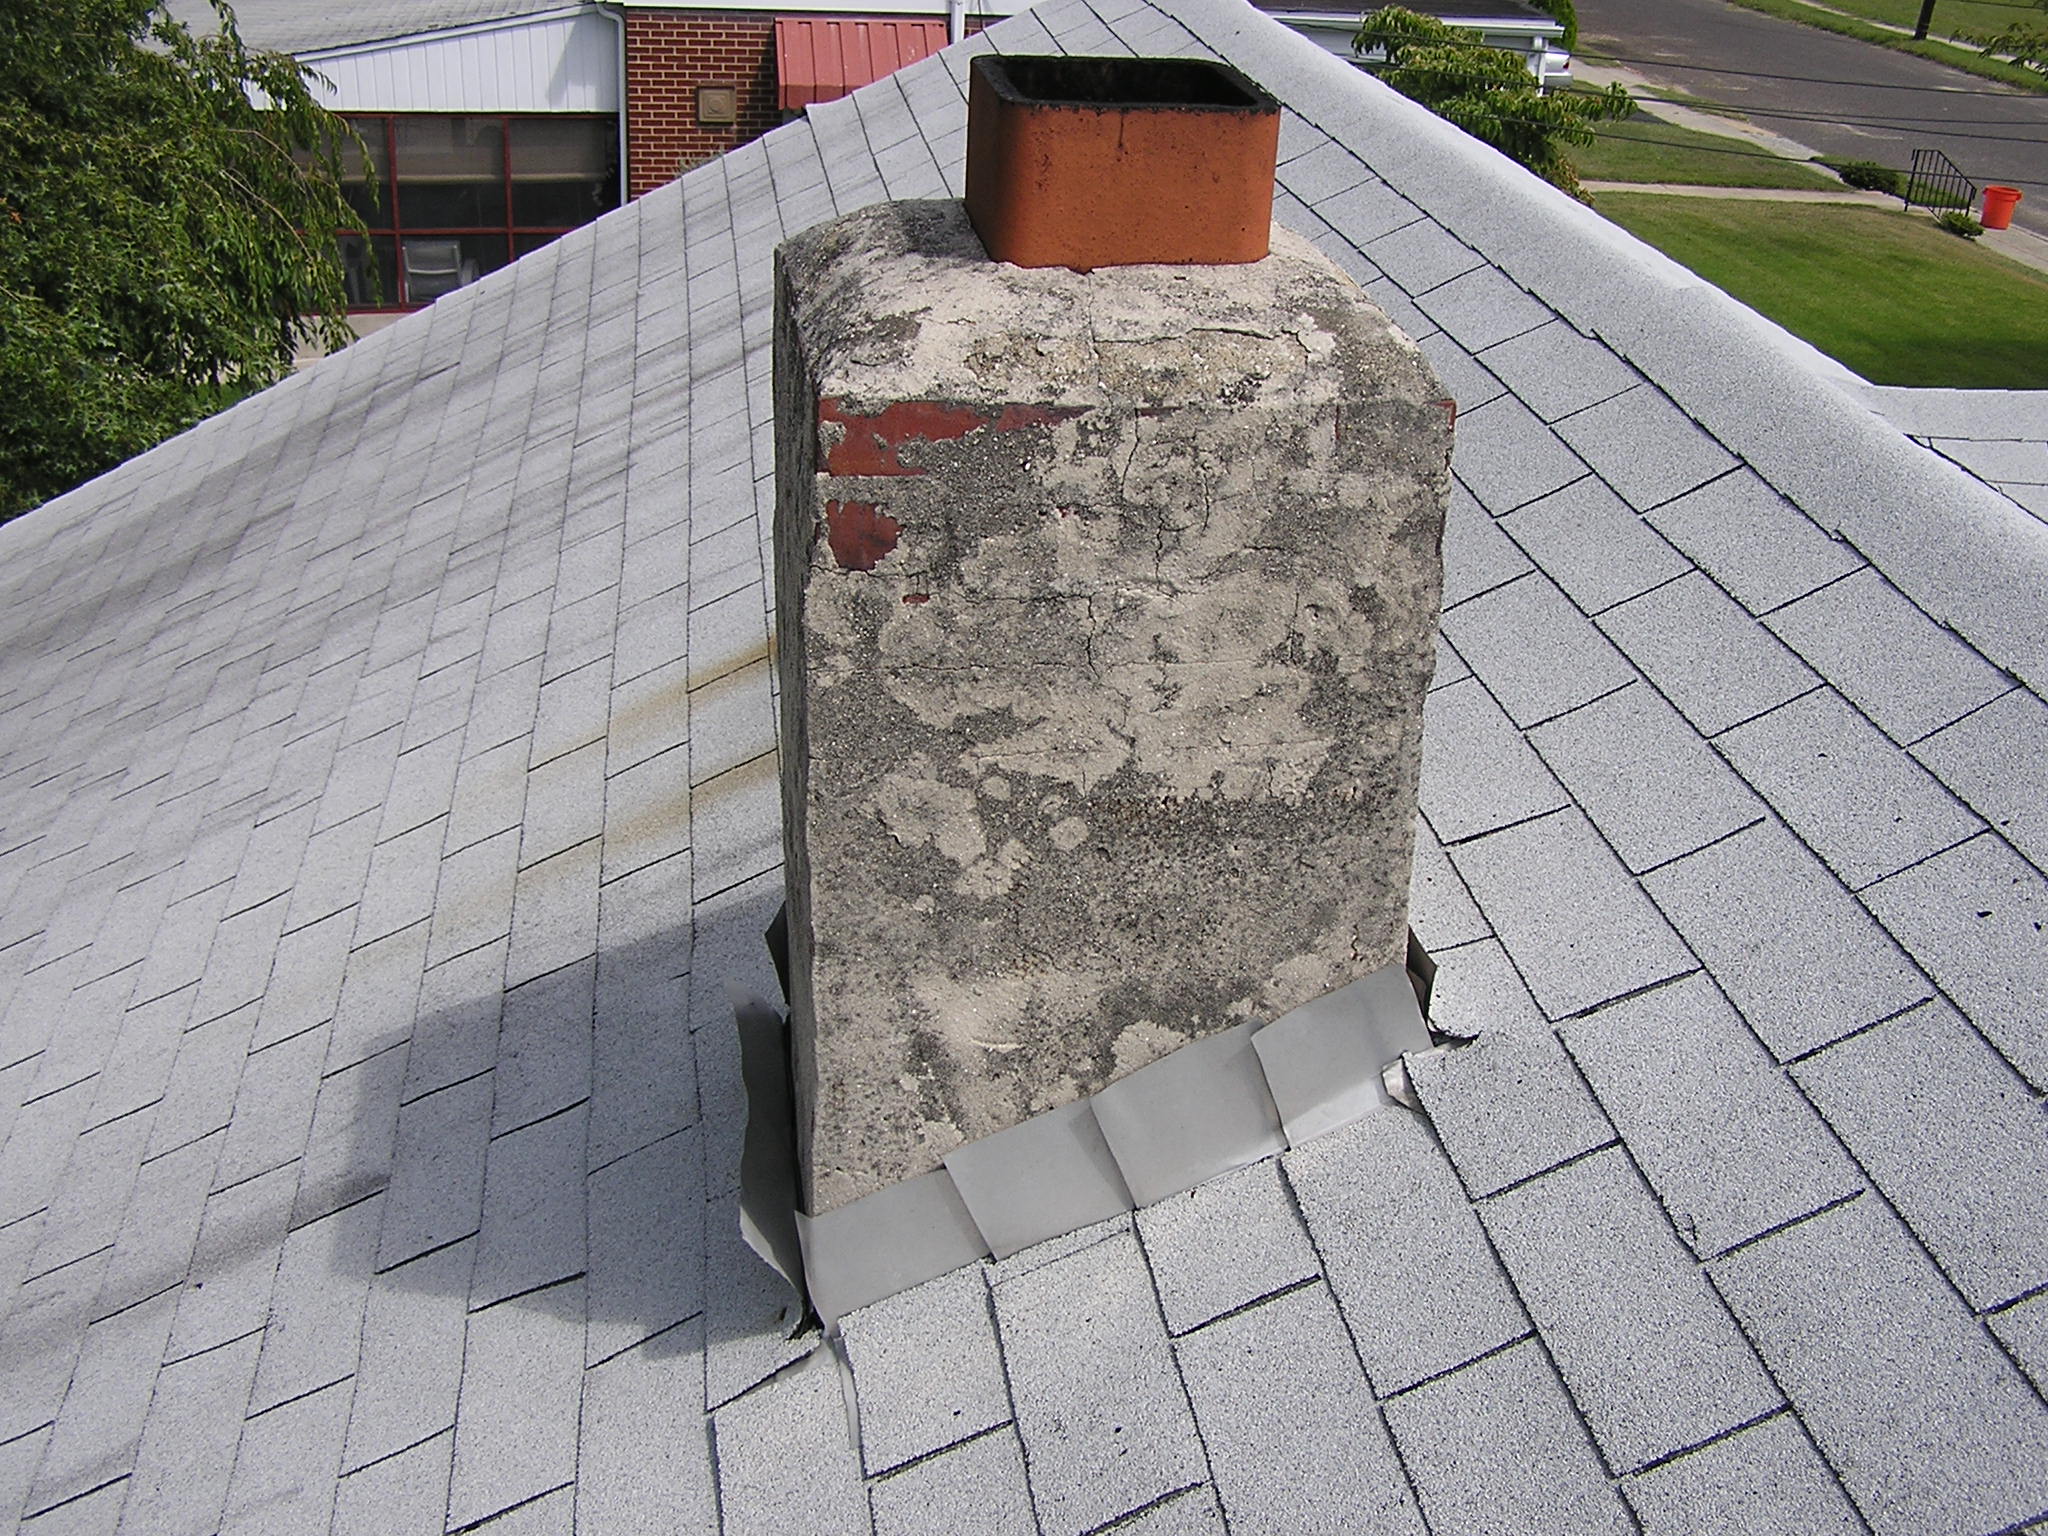 Chimney image - what is visible upon roof inspection.